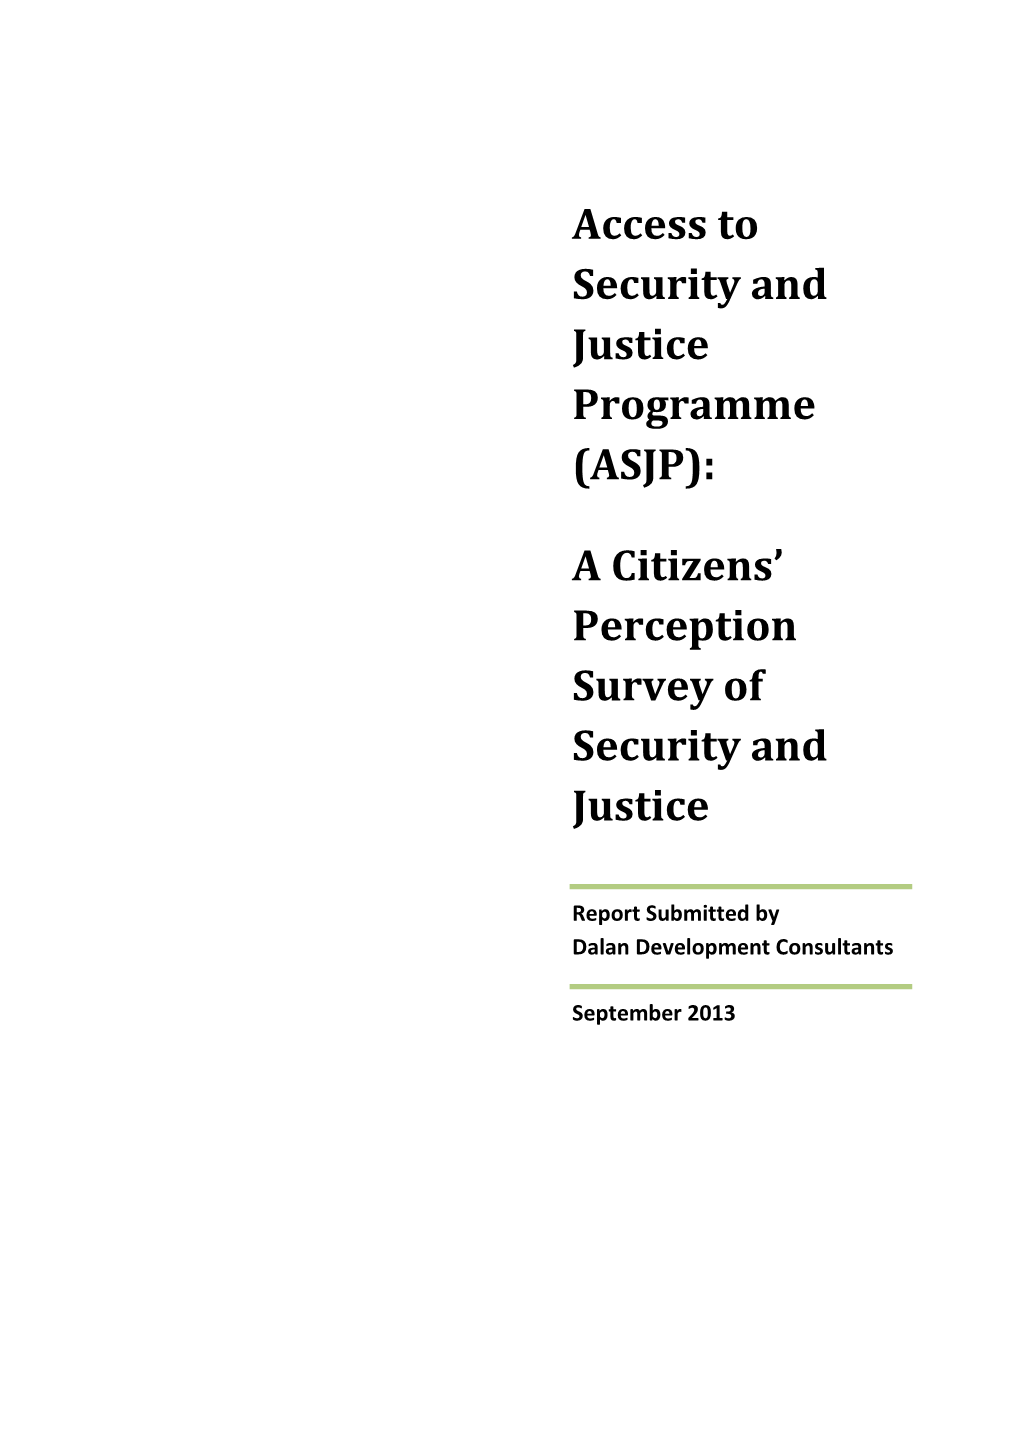 (ASJP): a Citizens' Perception Survey of Security and Justice